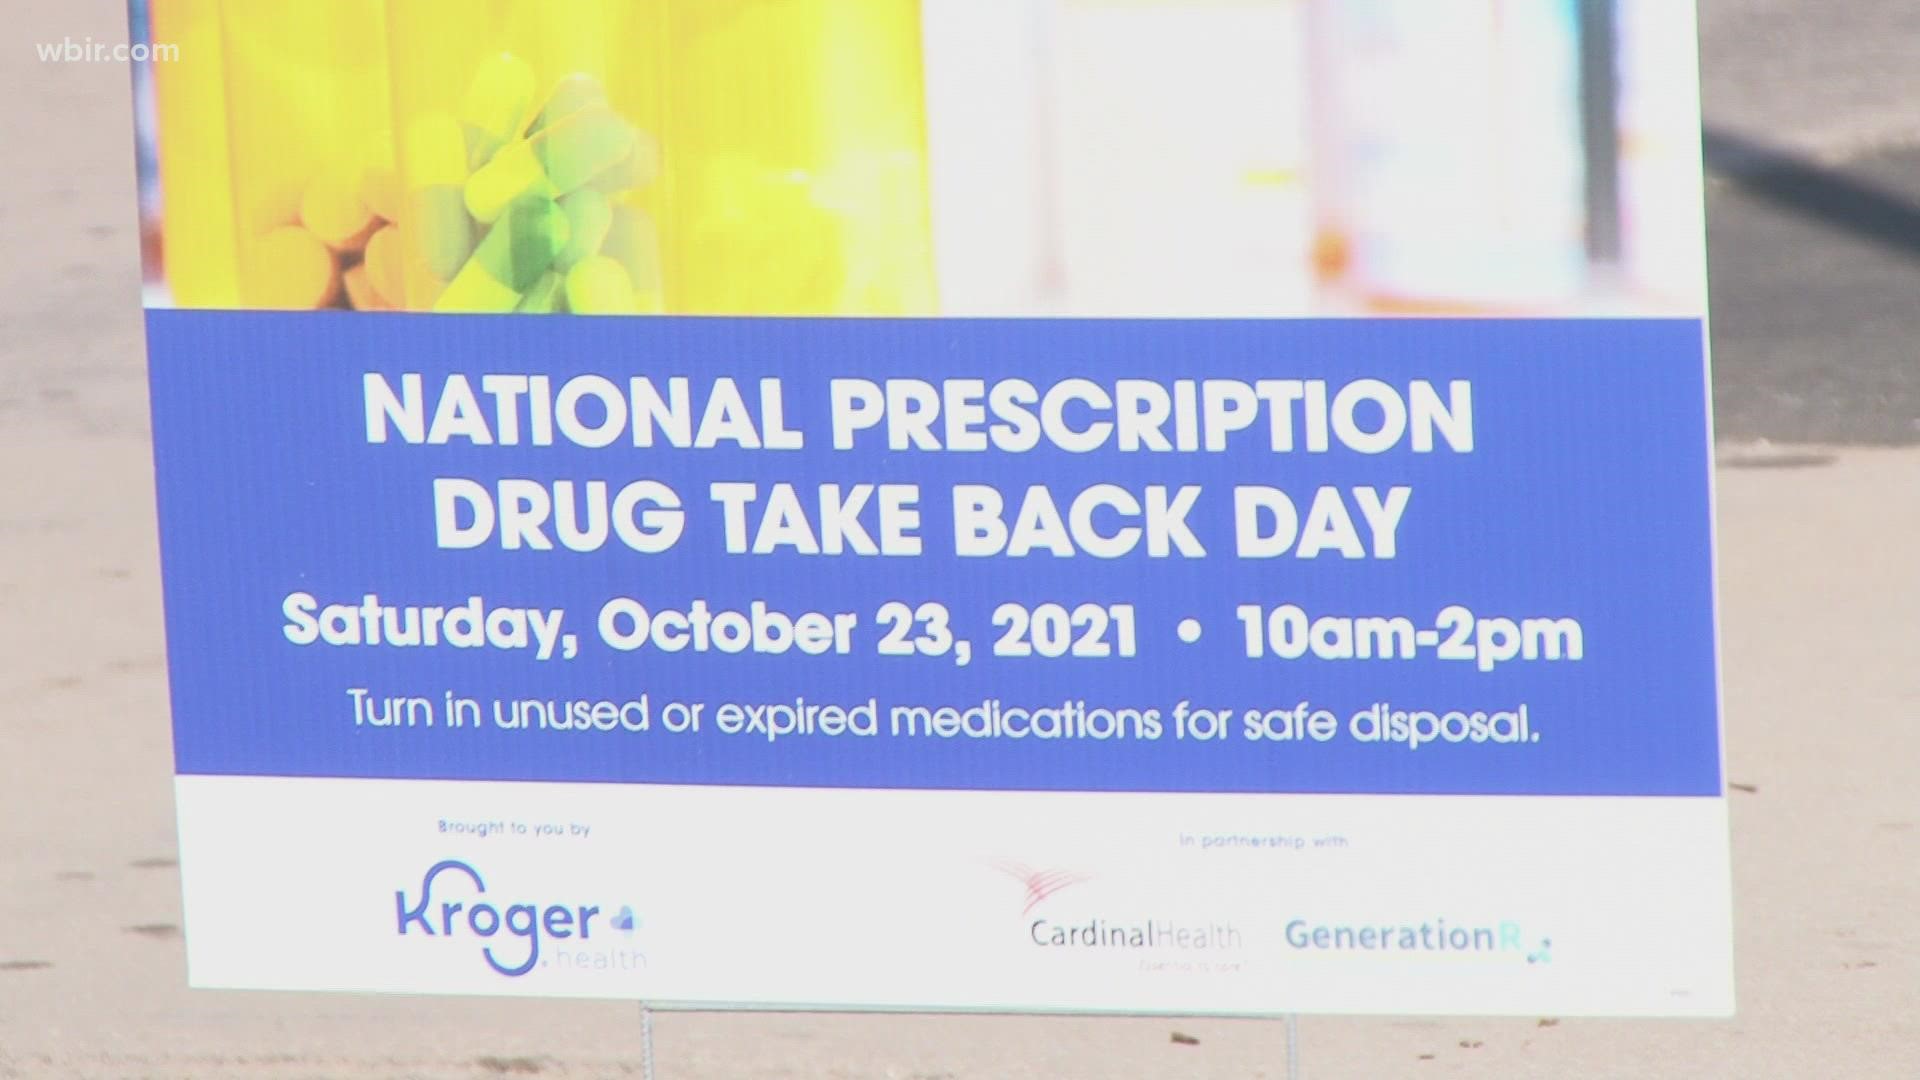 Police said that it was the most unwanted and unneeded medication they collected at a take-back event since 2018.